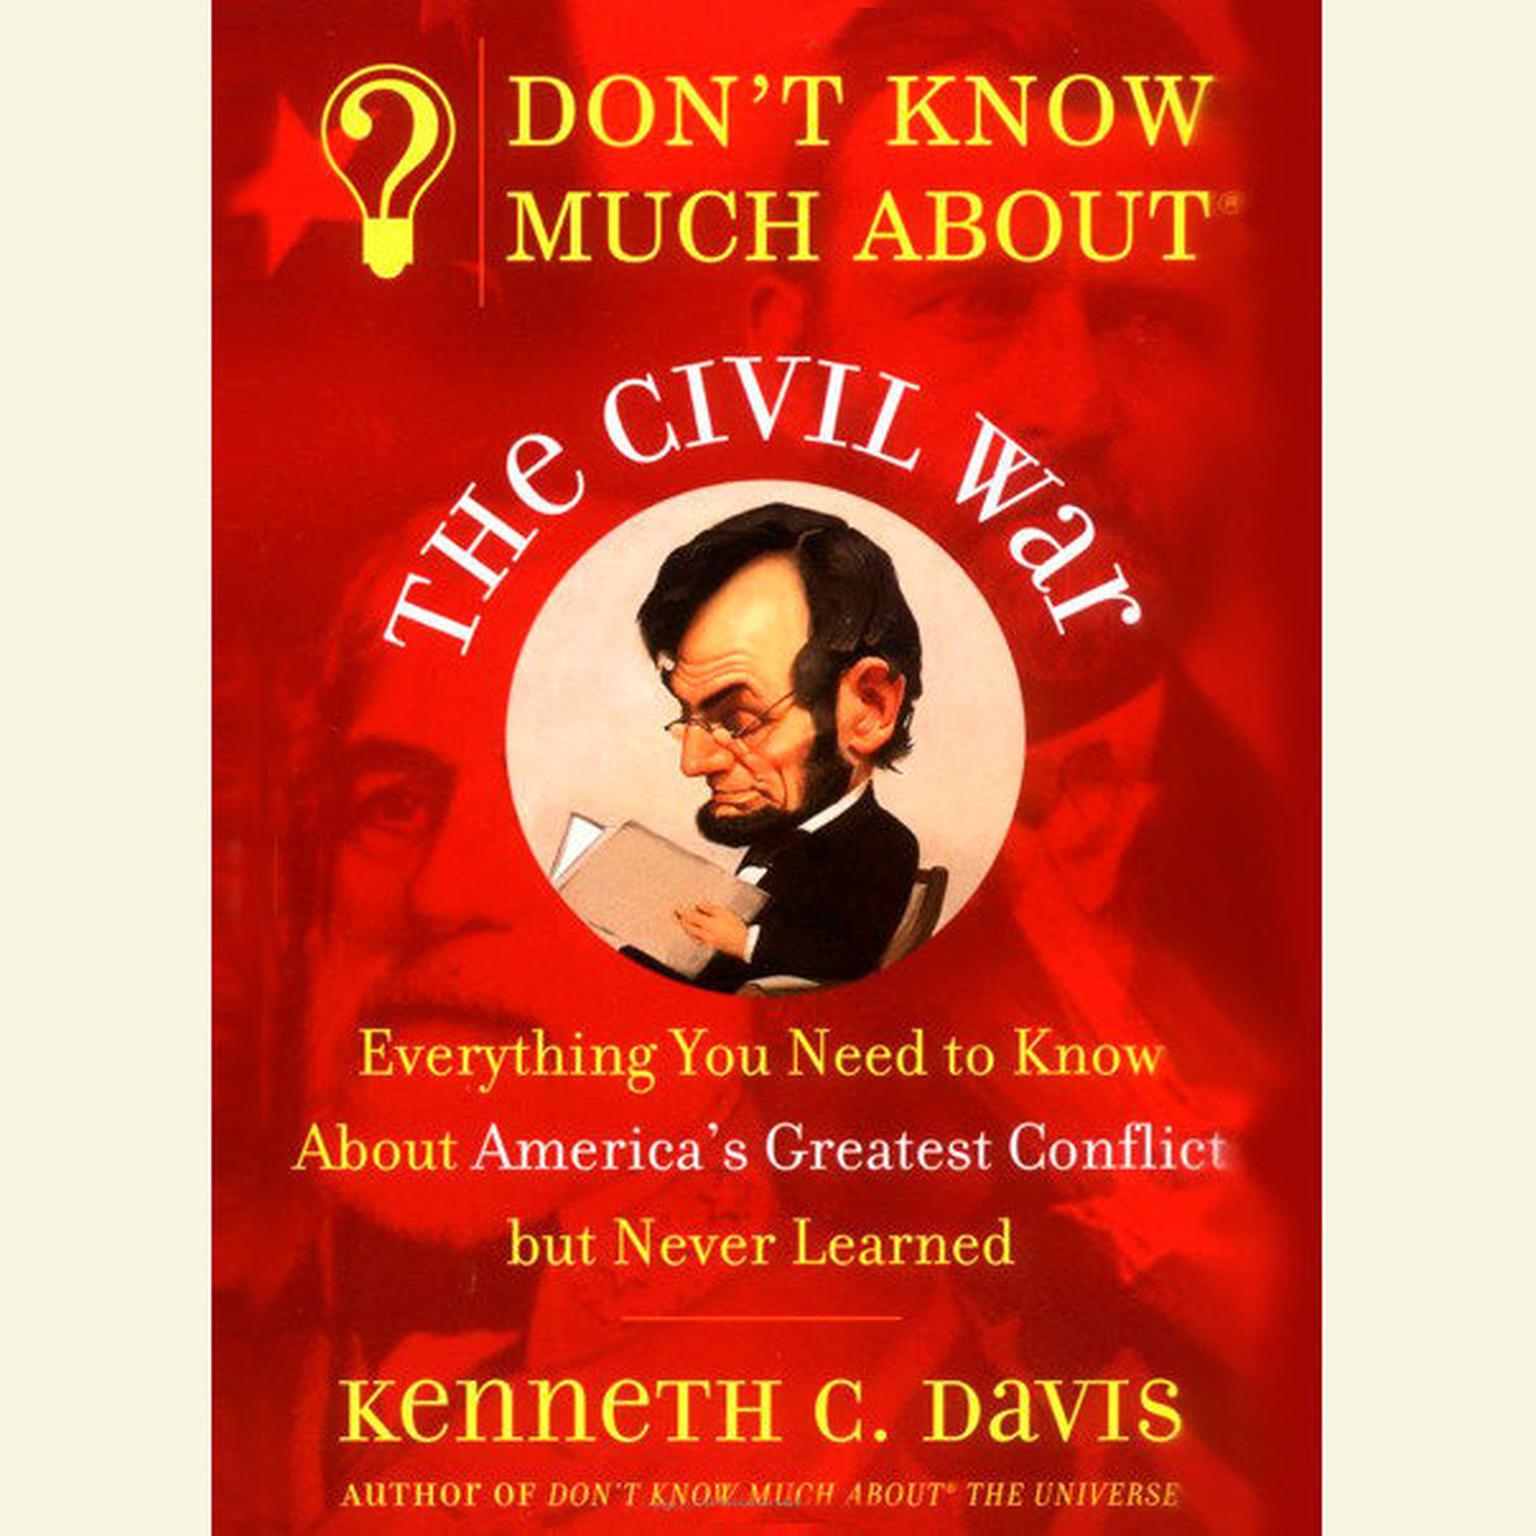 Dont Know Much About the Civil War (Abridged): Everything You Need to Know About Americas Greatest Conflict but Never Learned Audiobook, by Kenneth C. Davis